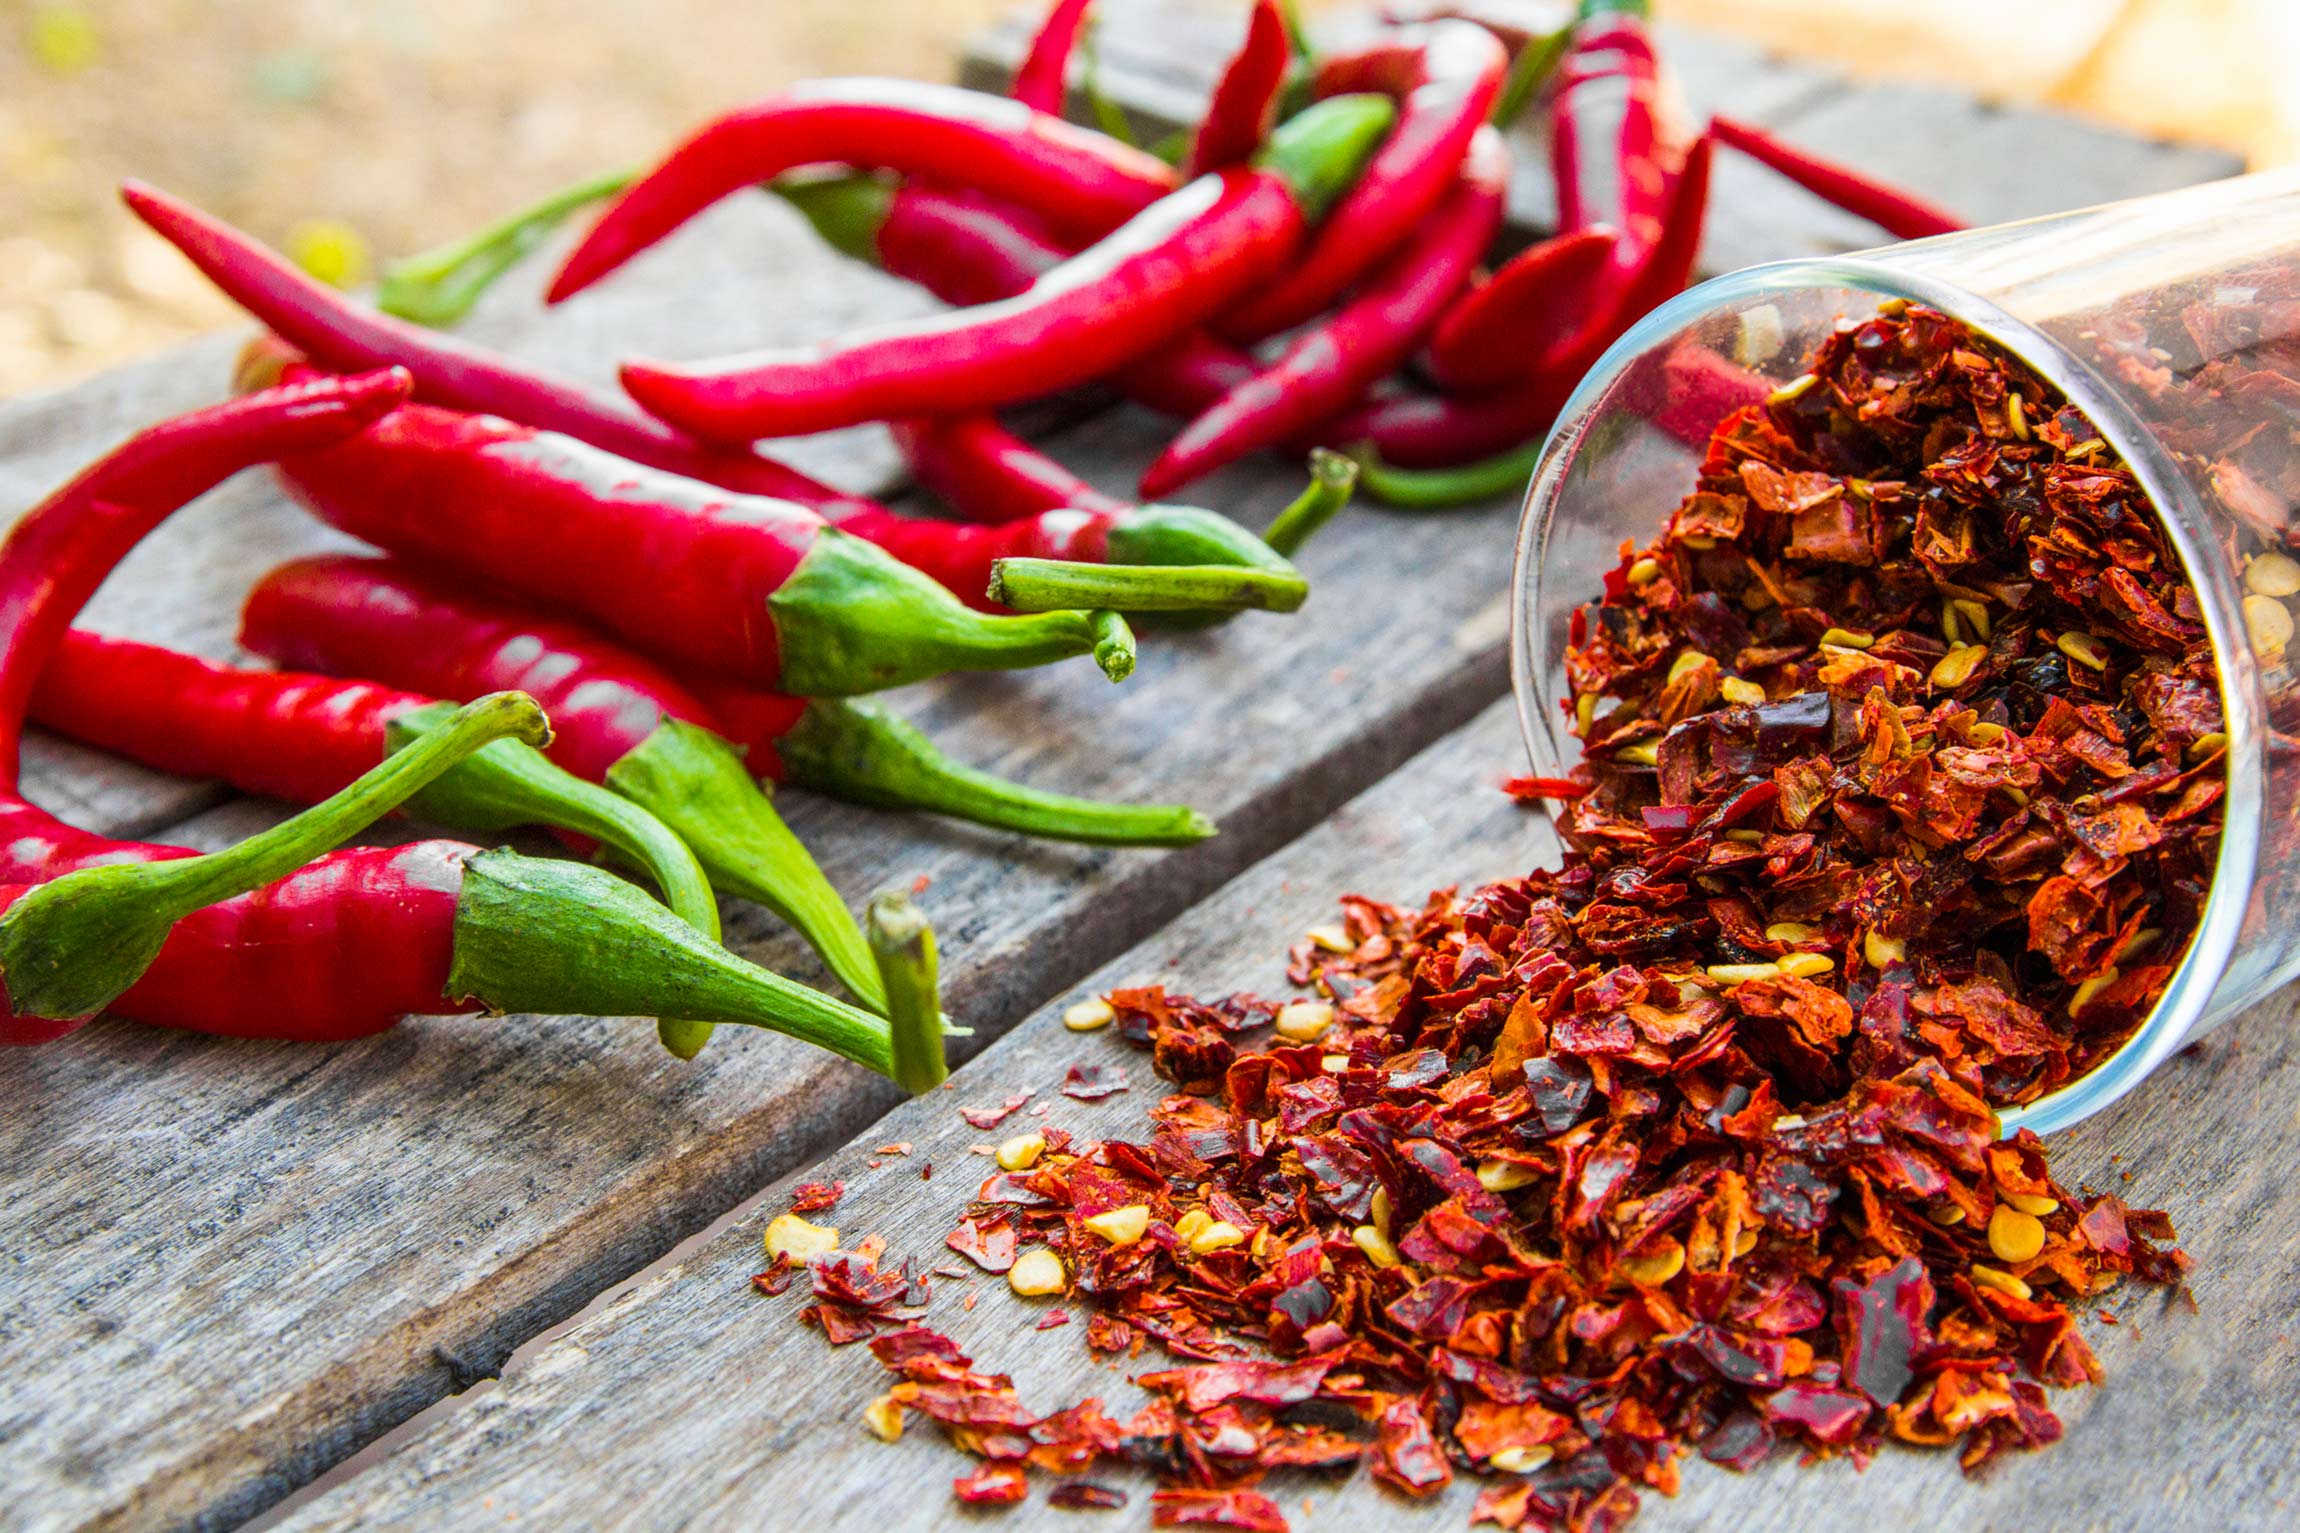 Healthy spices: pepper